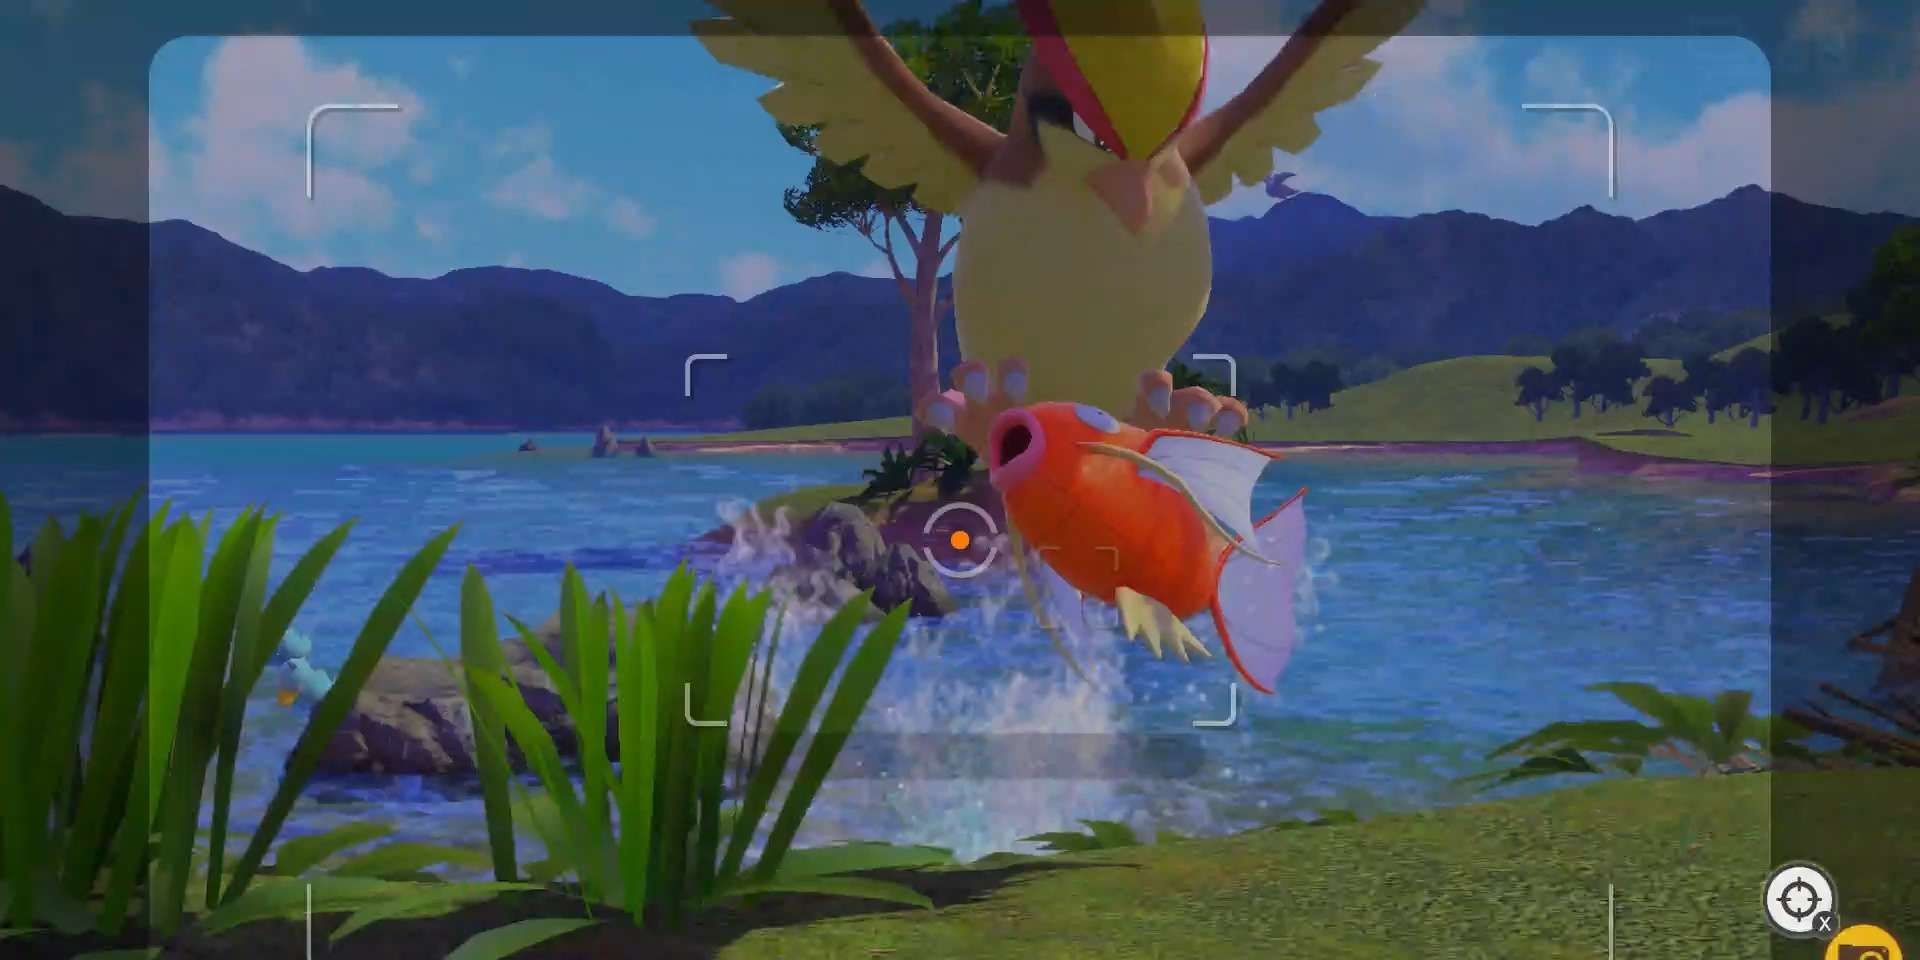 The photo opportunity for the "Flopping By The Water" request in New Pokemon Snap